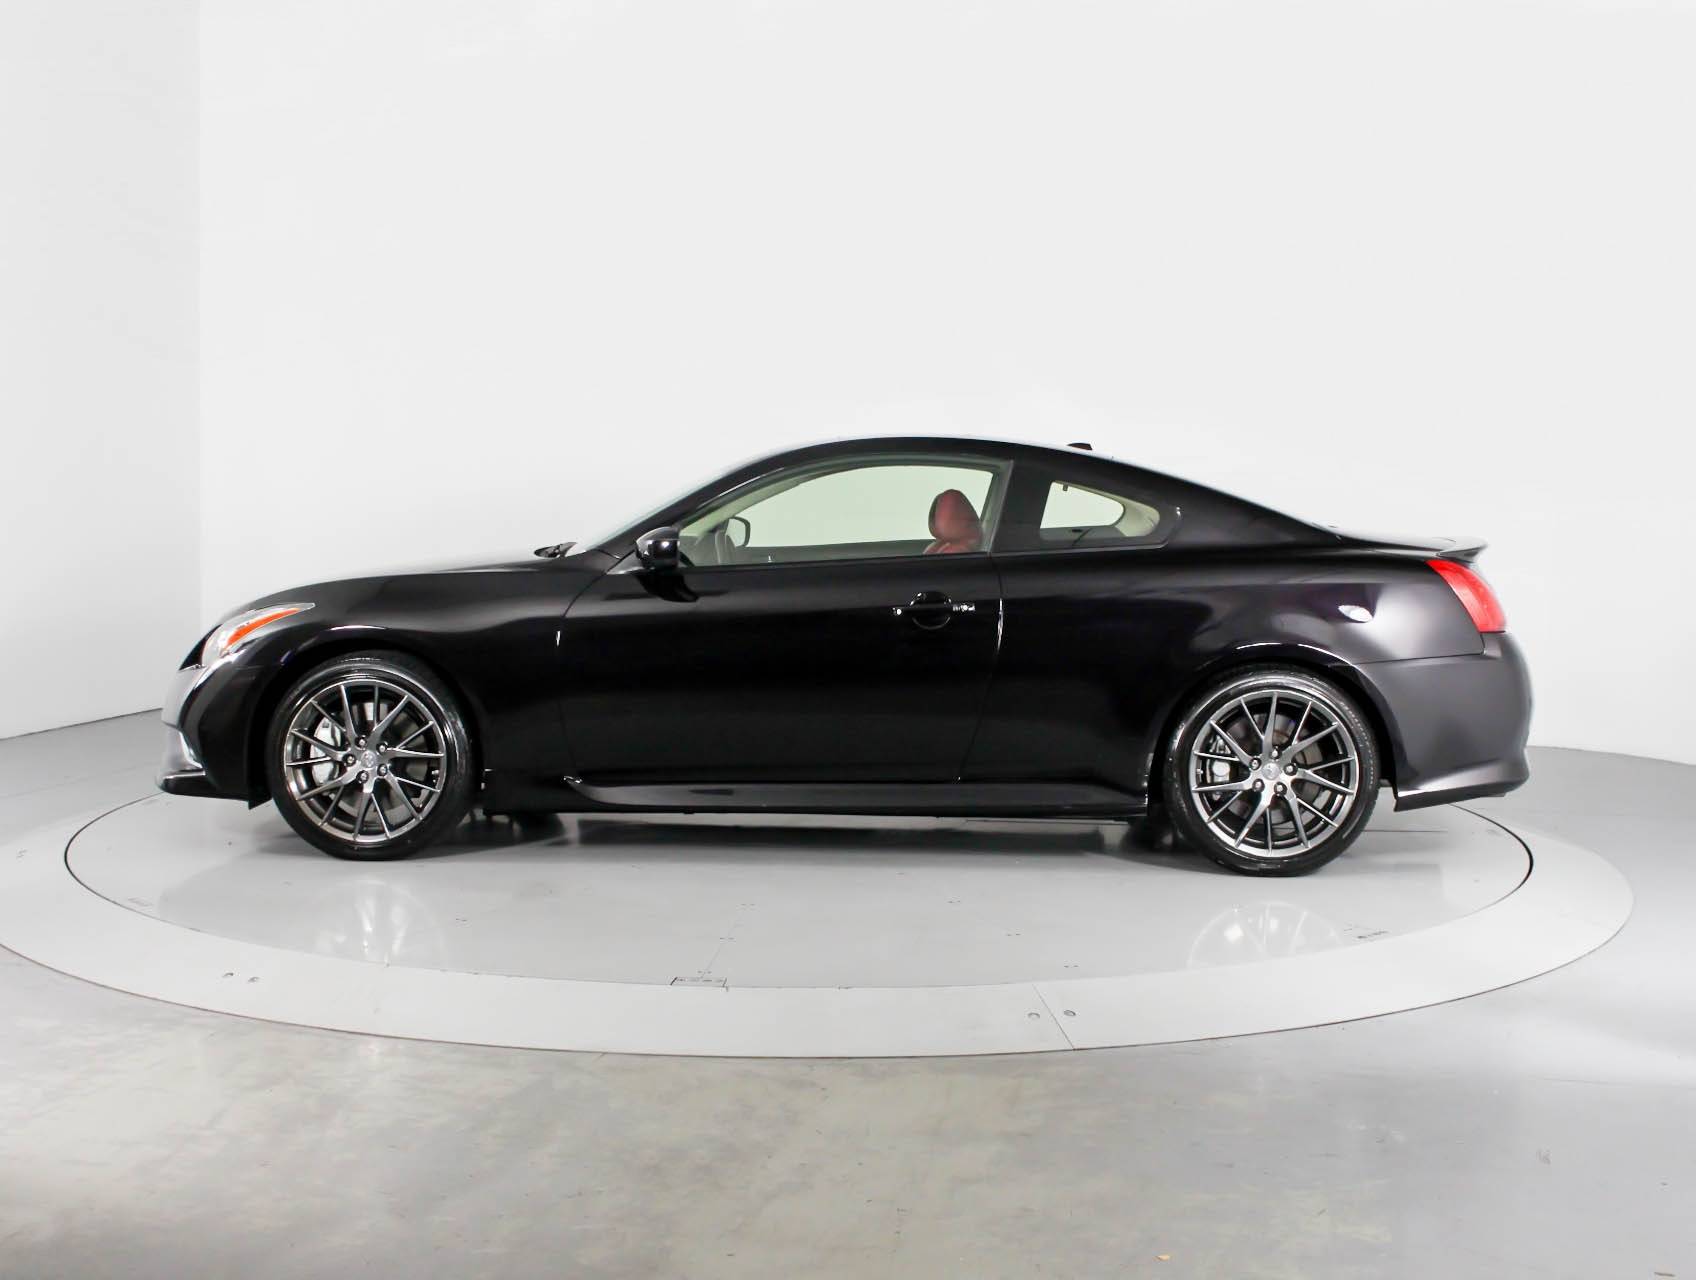 Used 2013 INFINITI G37 IPL for sale in WEST PALM | 93269